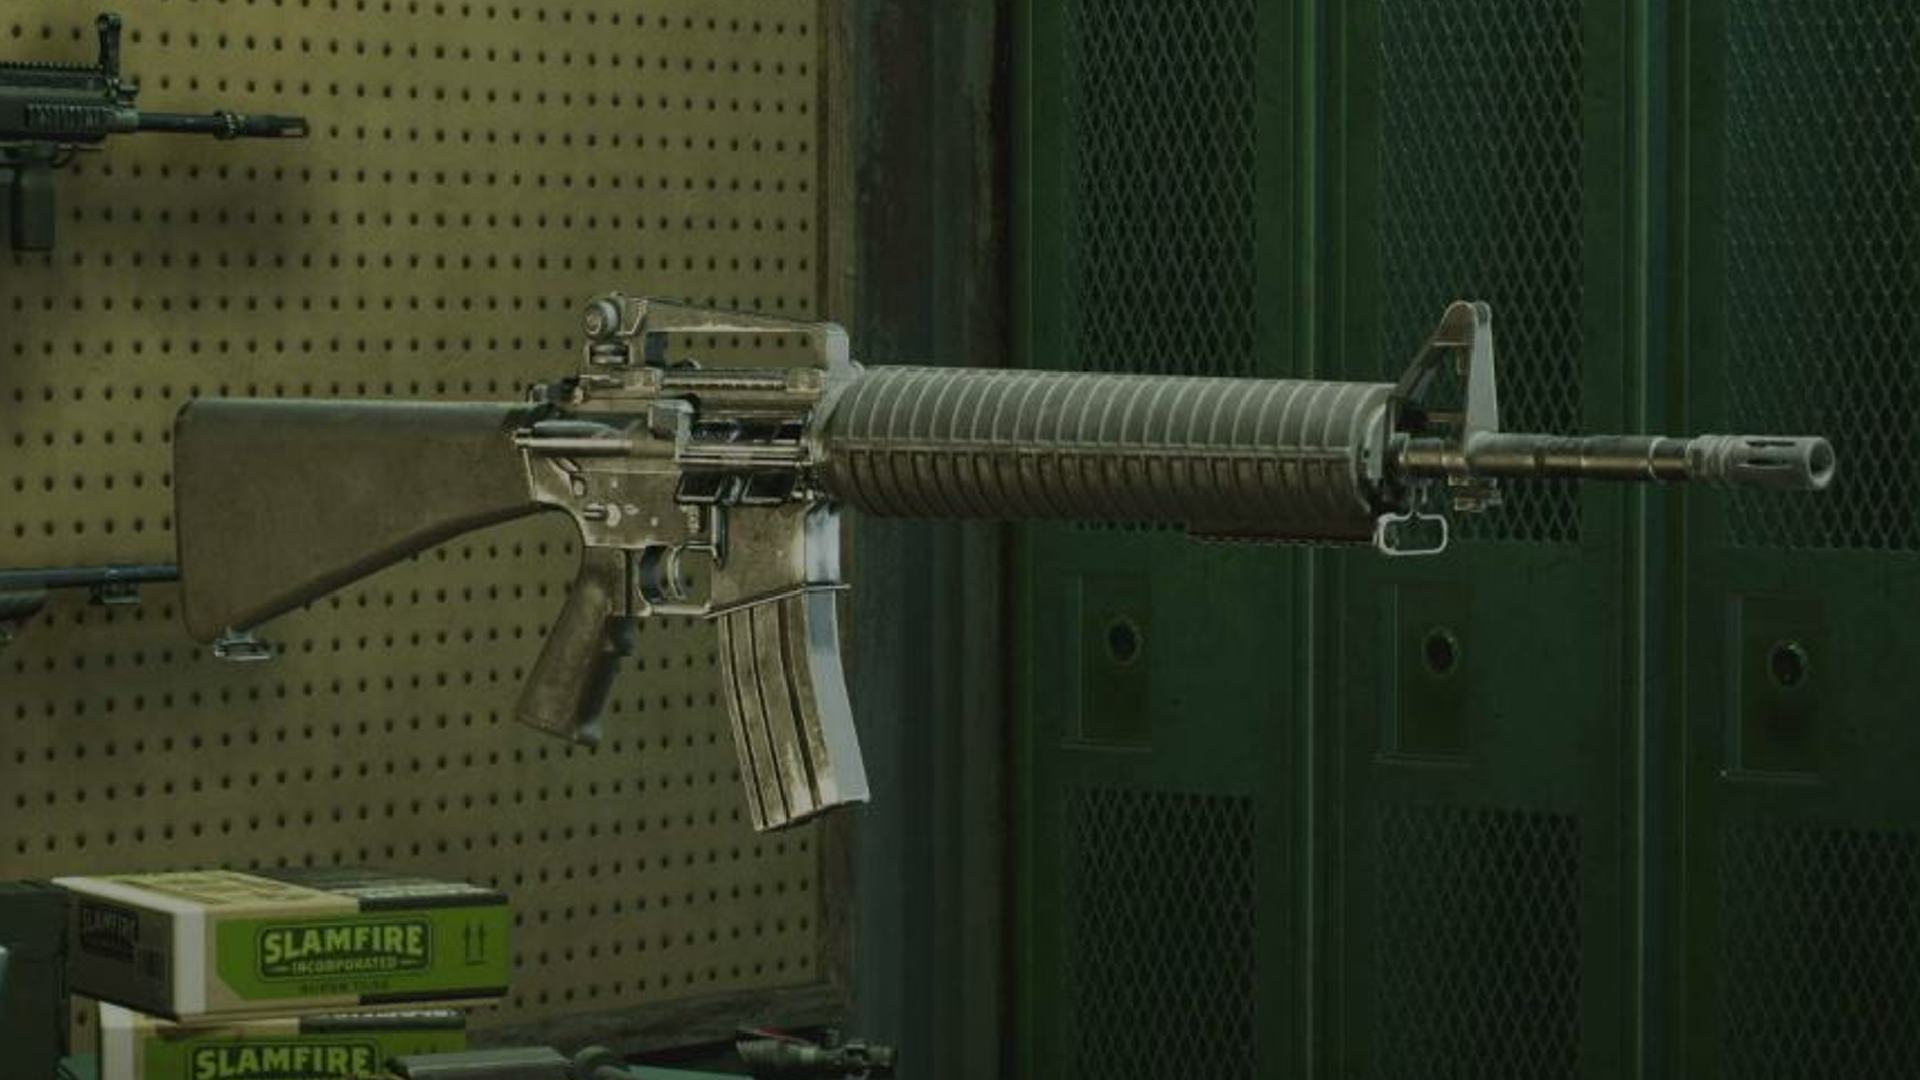 Back 4 Blood Best Weapons: A shot of the M16 weapon in the menu.